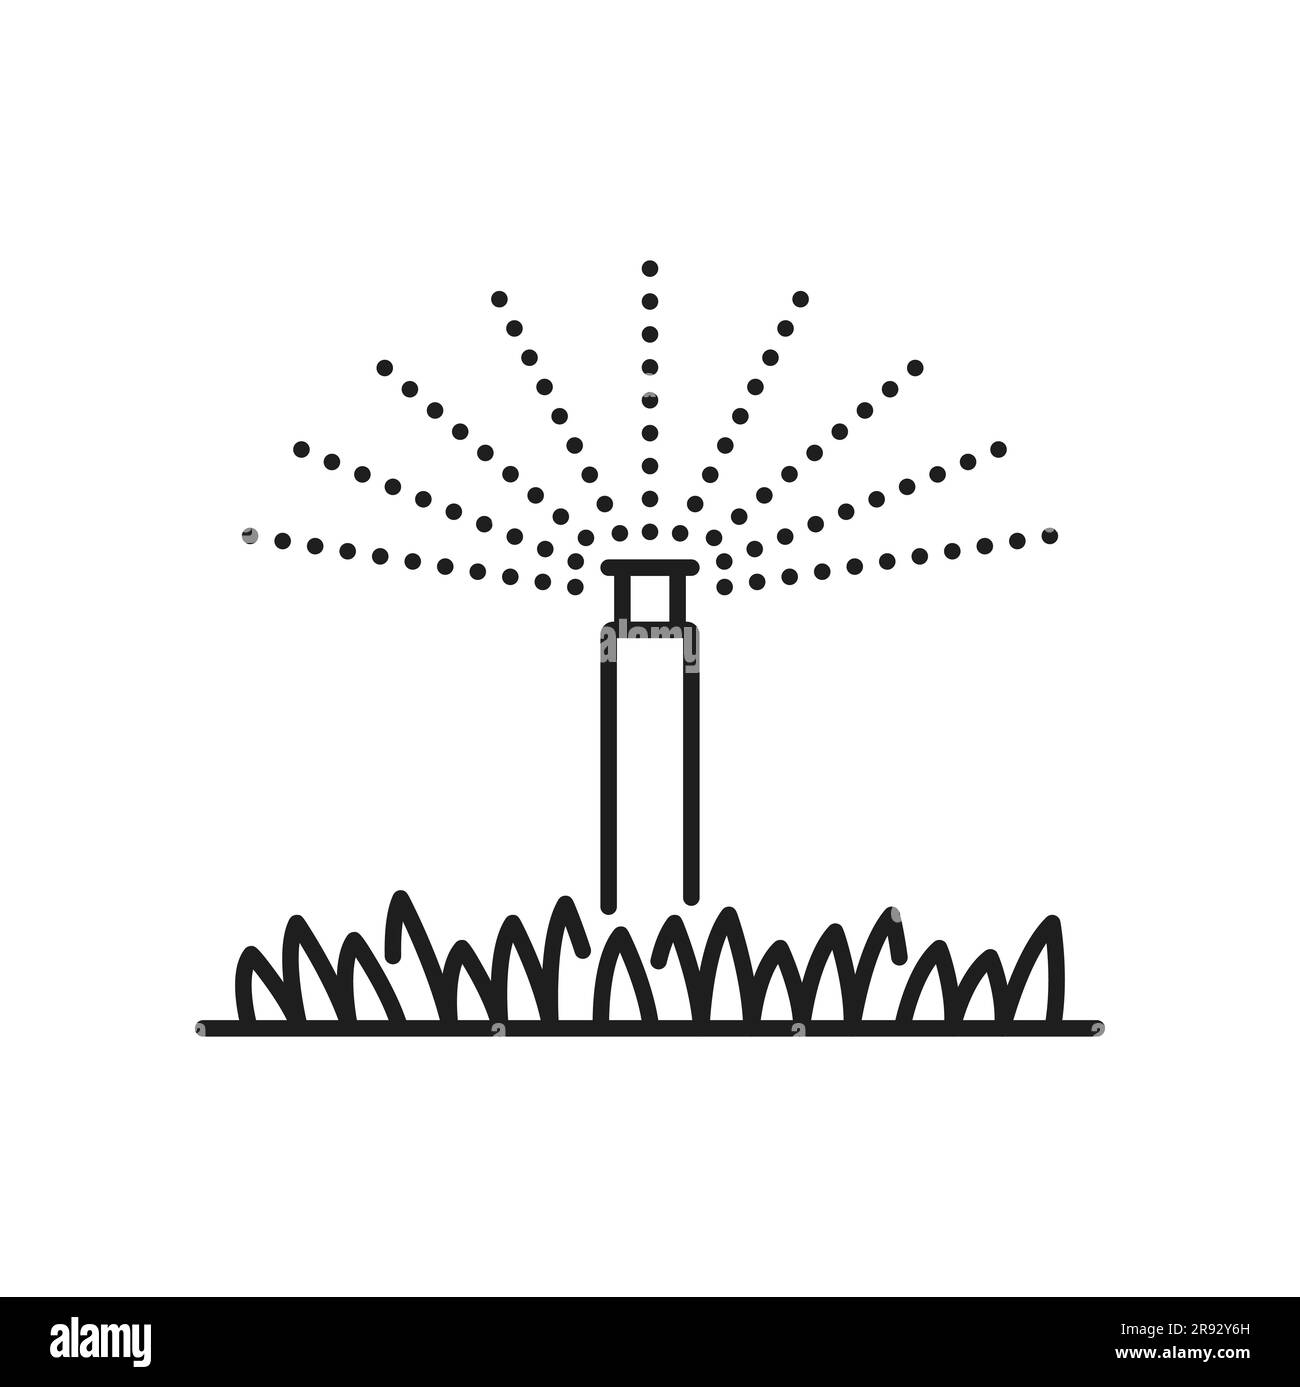 Lawn grass or field irrigation system icon. Garden irrigation automatic system, agriculture sprinkling technology or aquaponics vector icon. Farmland drip watering equipment line pictogram or sign Stock Vector